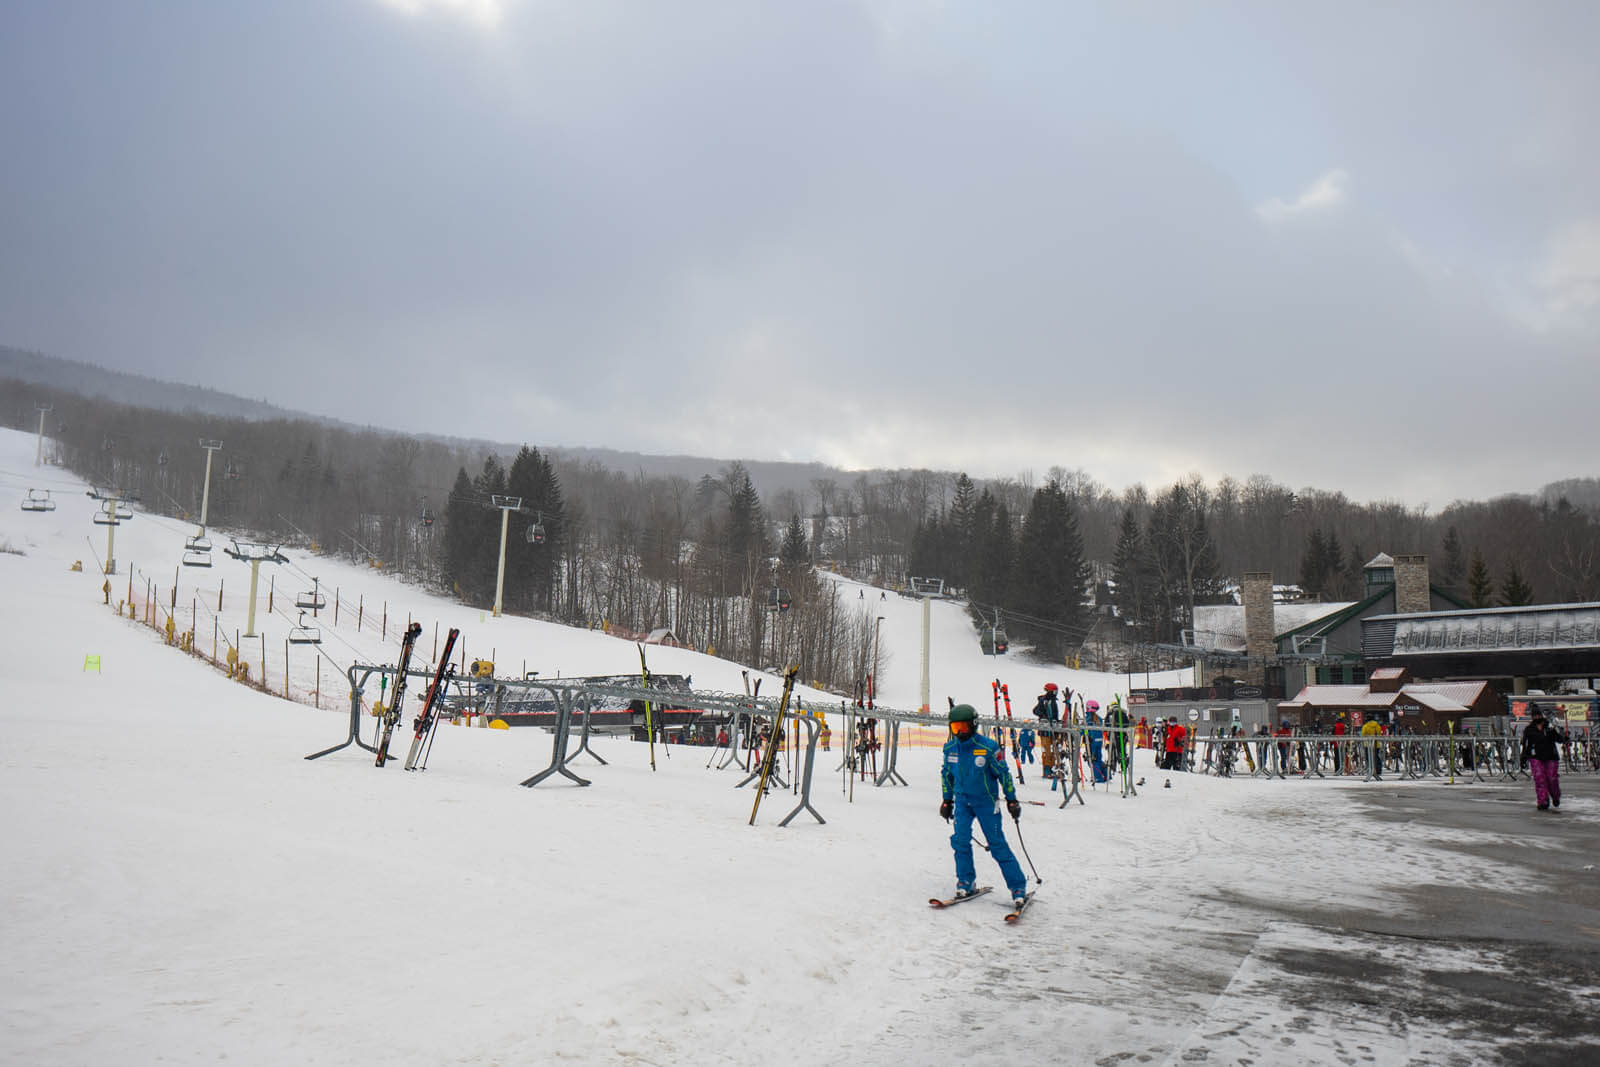 Base of Stratton Mountain skiing and snowboarding options in Southern Vermont